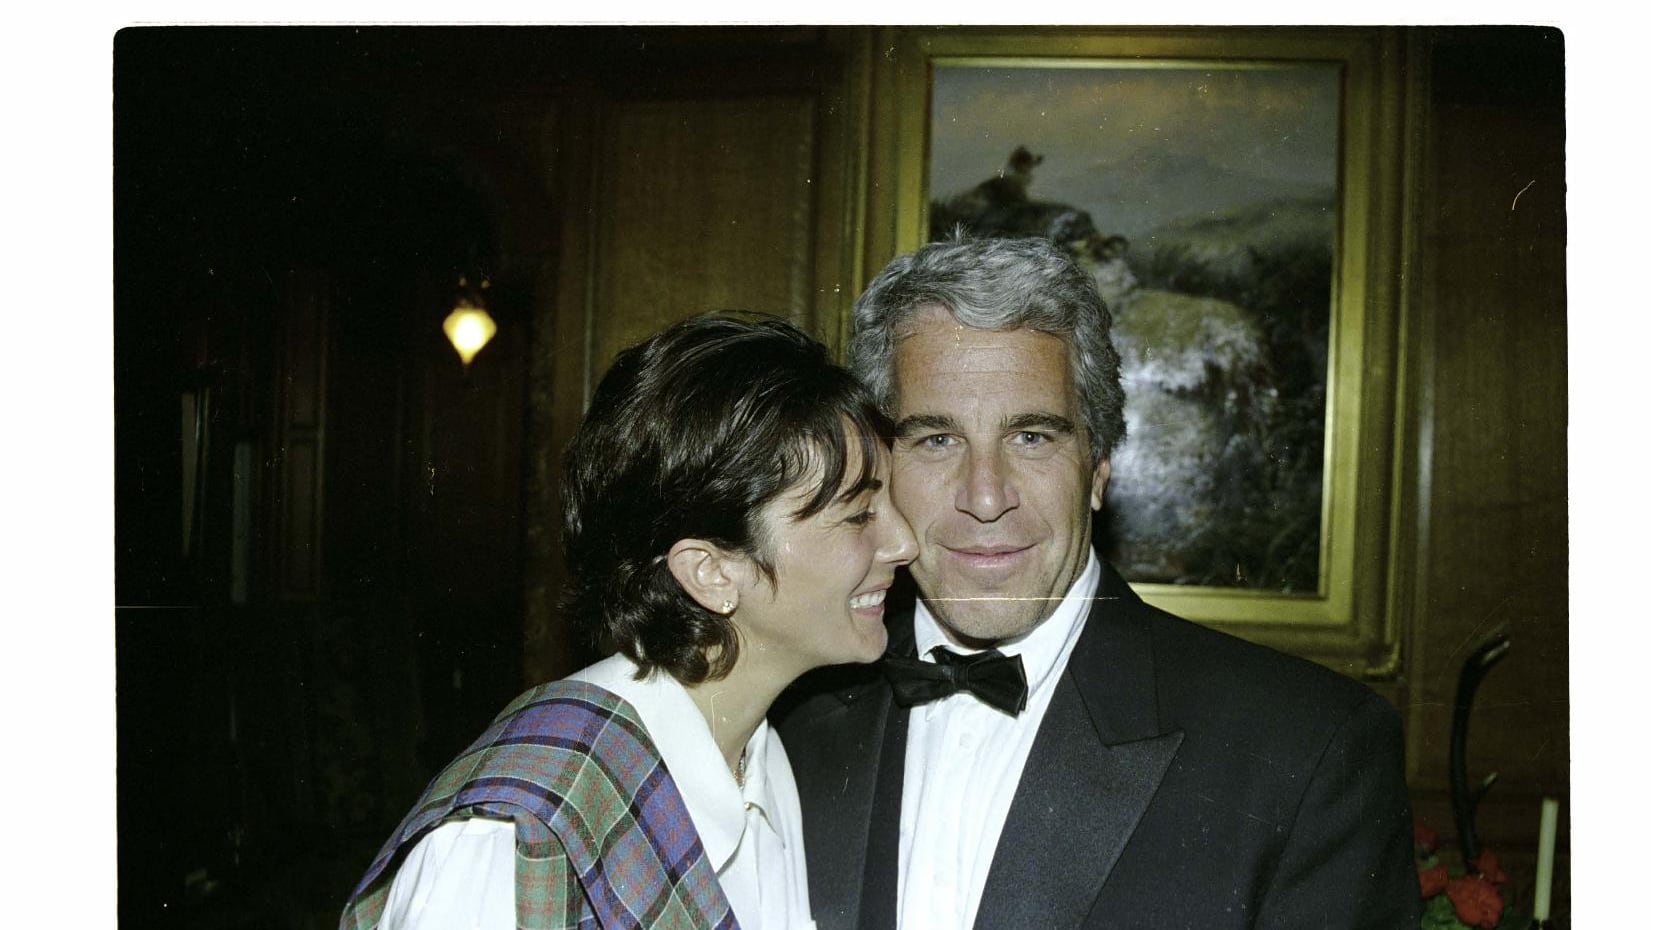 The late Jeffrey Epstein with Ghislaine Maxwell, who was found guilty of child sex trafficking